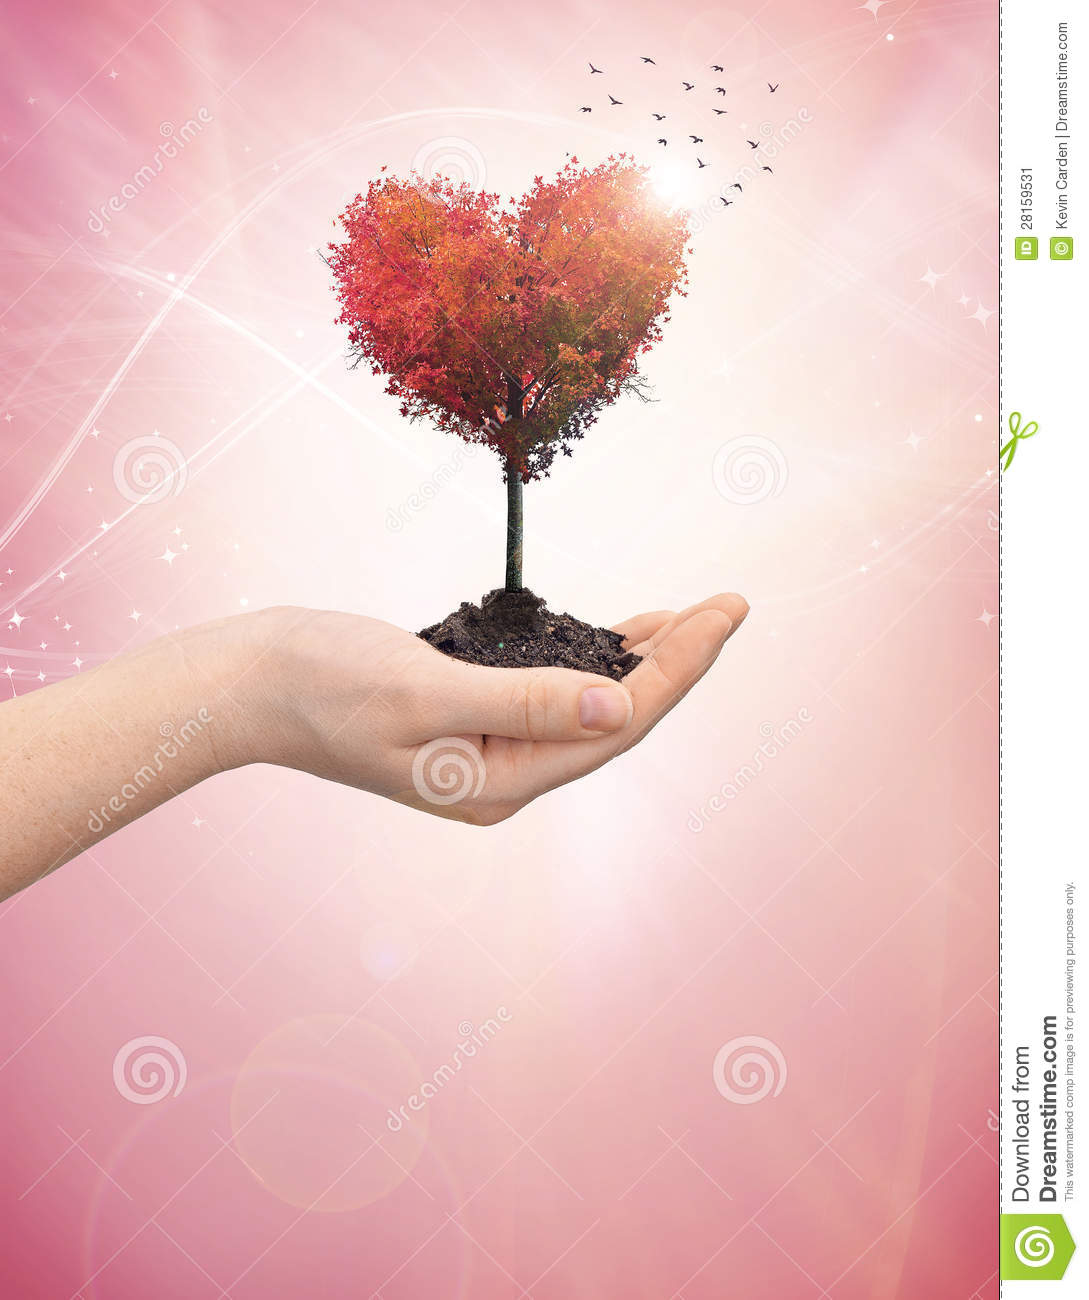 More Similar Stock Images Of   Woman S Hand Holding A Tree Heart